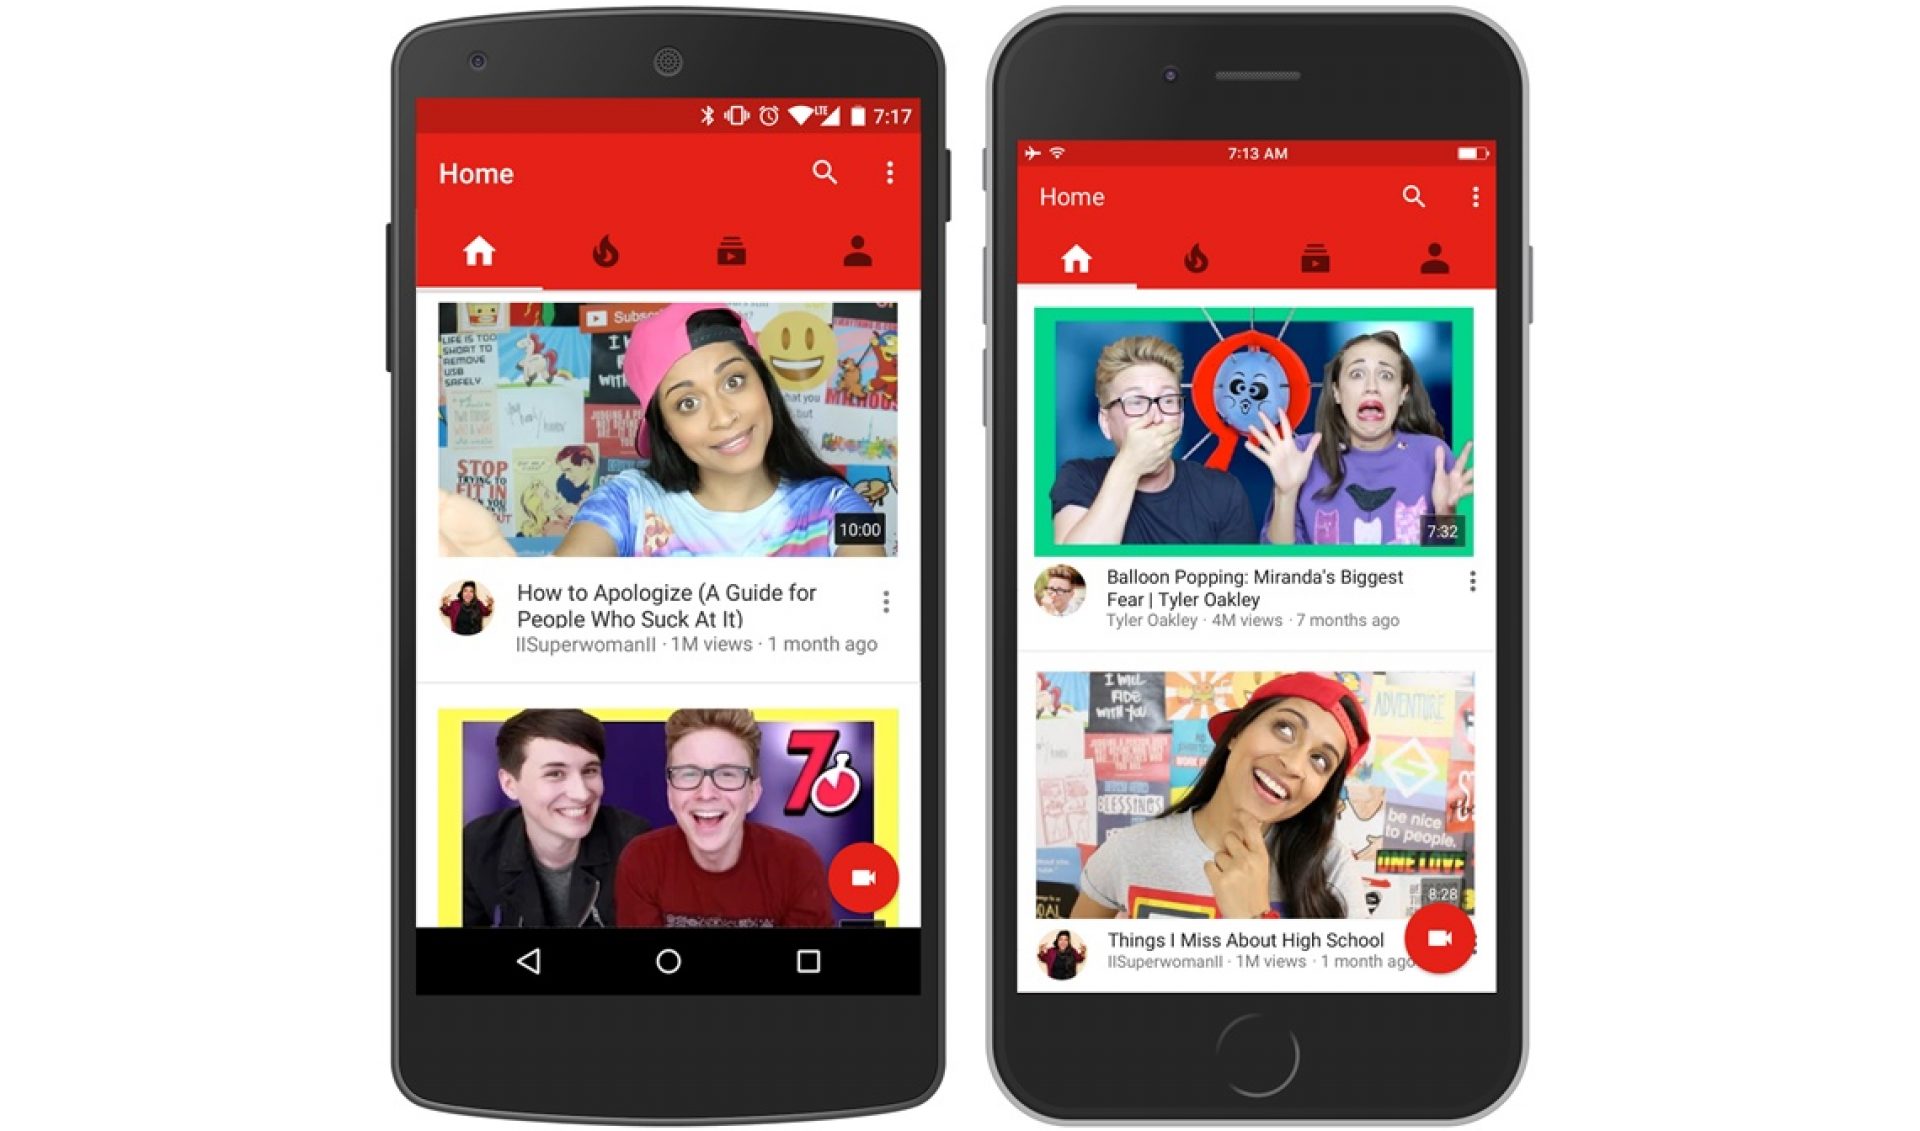 New Job Listing Suggests YouTube Wants To Develop More Mobile Video Effects